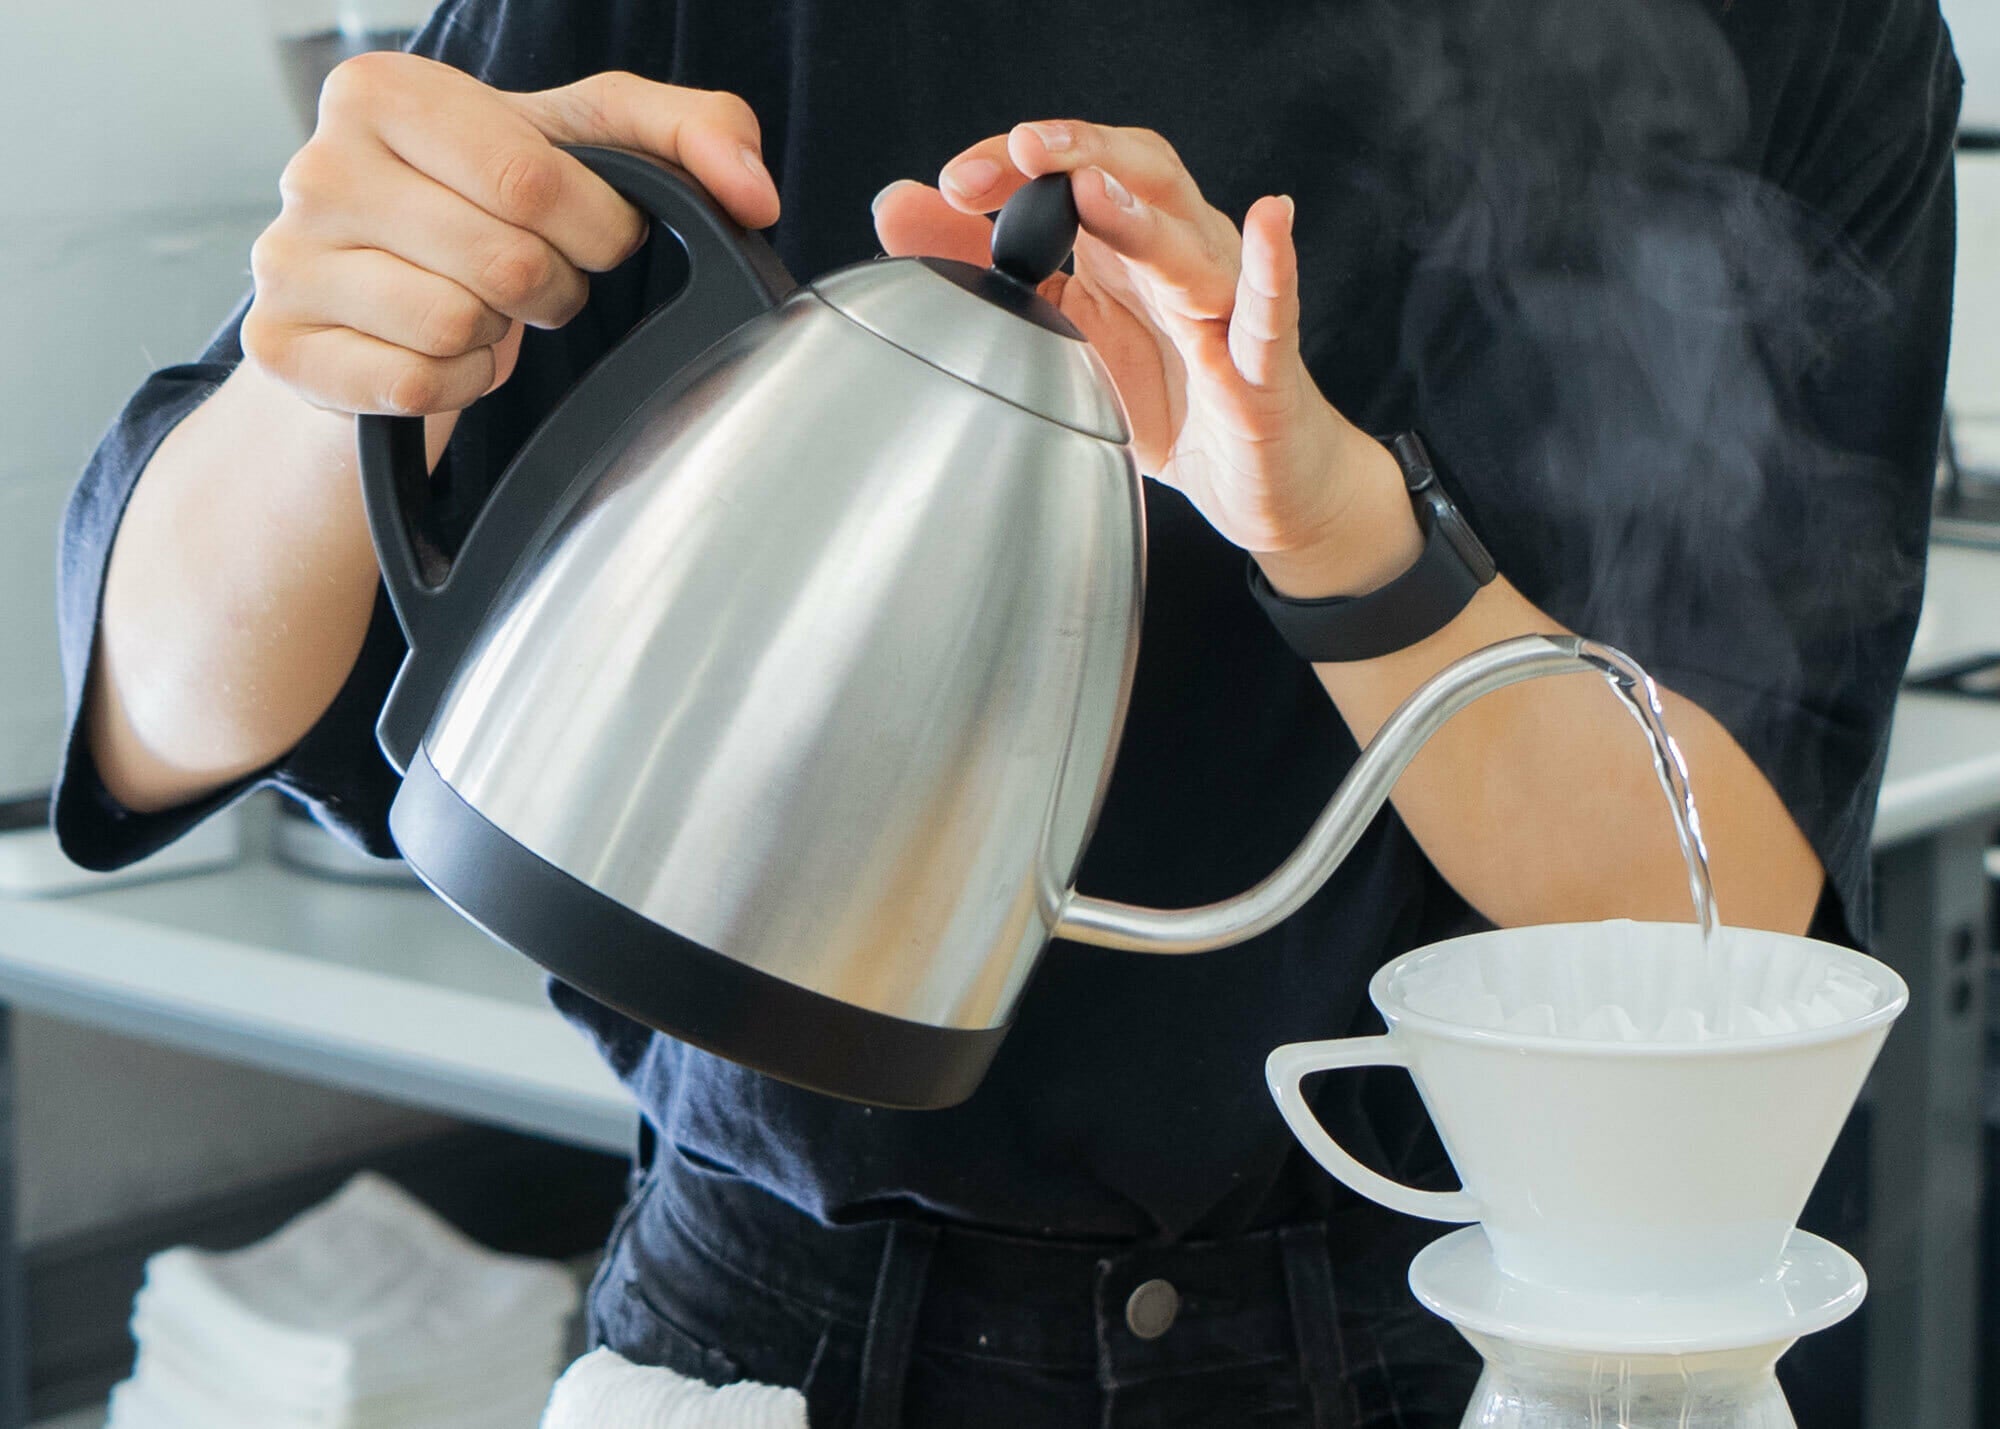 Someone is holding a kettle while pouring into a brewing device.